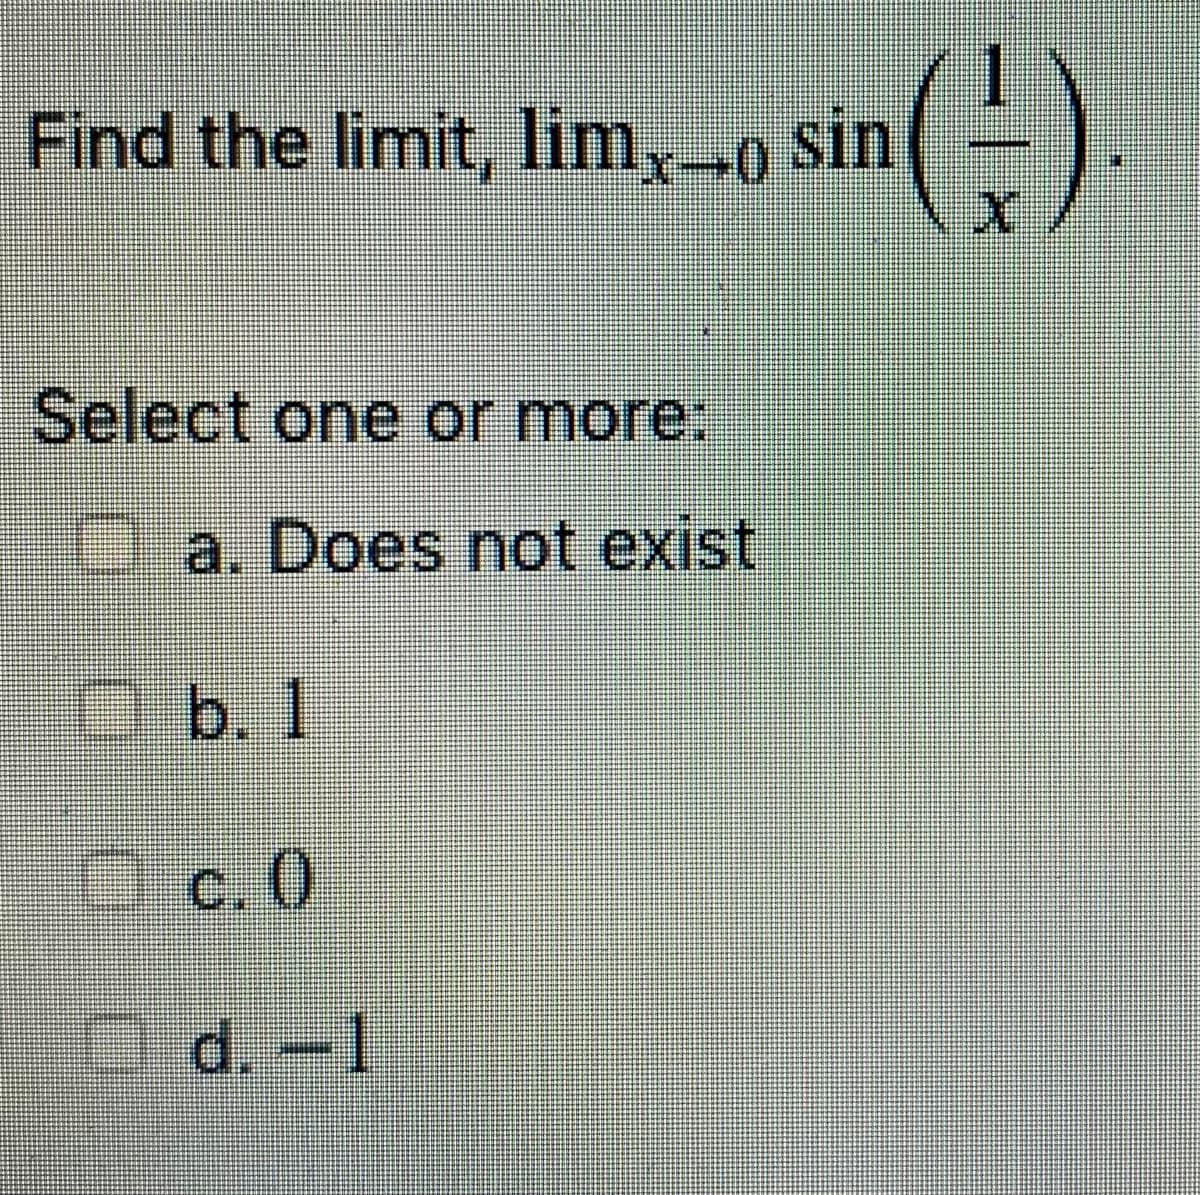 Find the limit, lim,-9 sin(
Select one or more:
a. Does not exist
Db.1
Oc. 0
C, ()
d.-1
